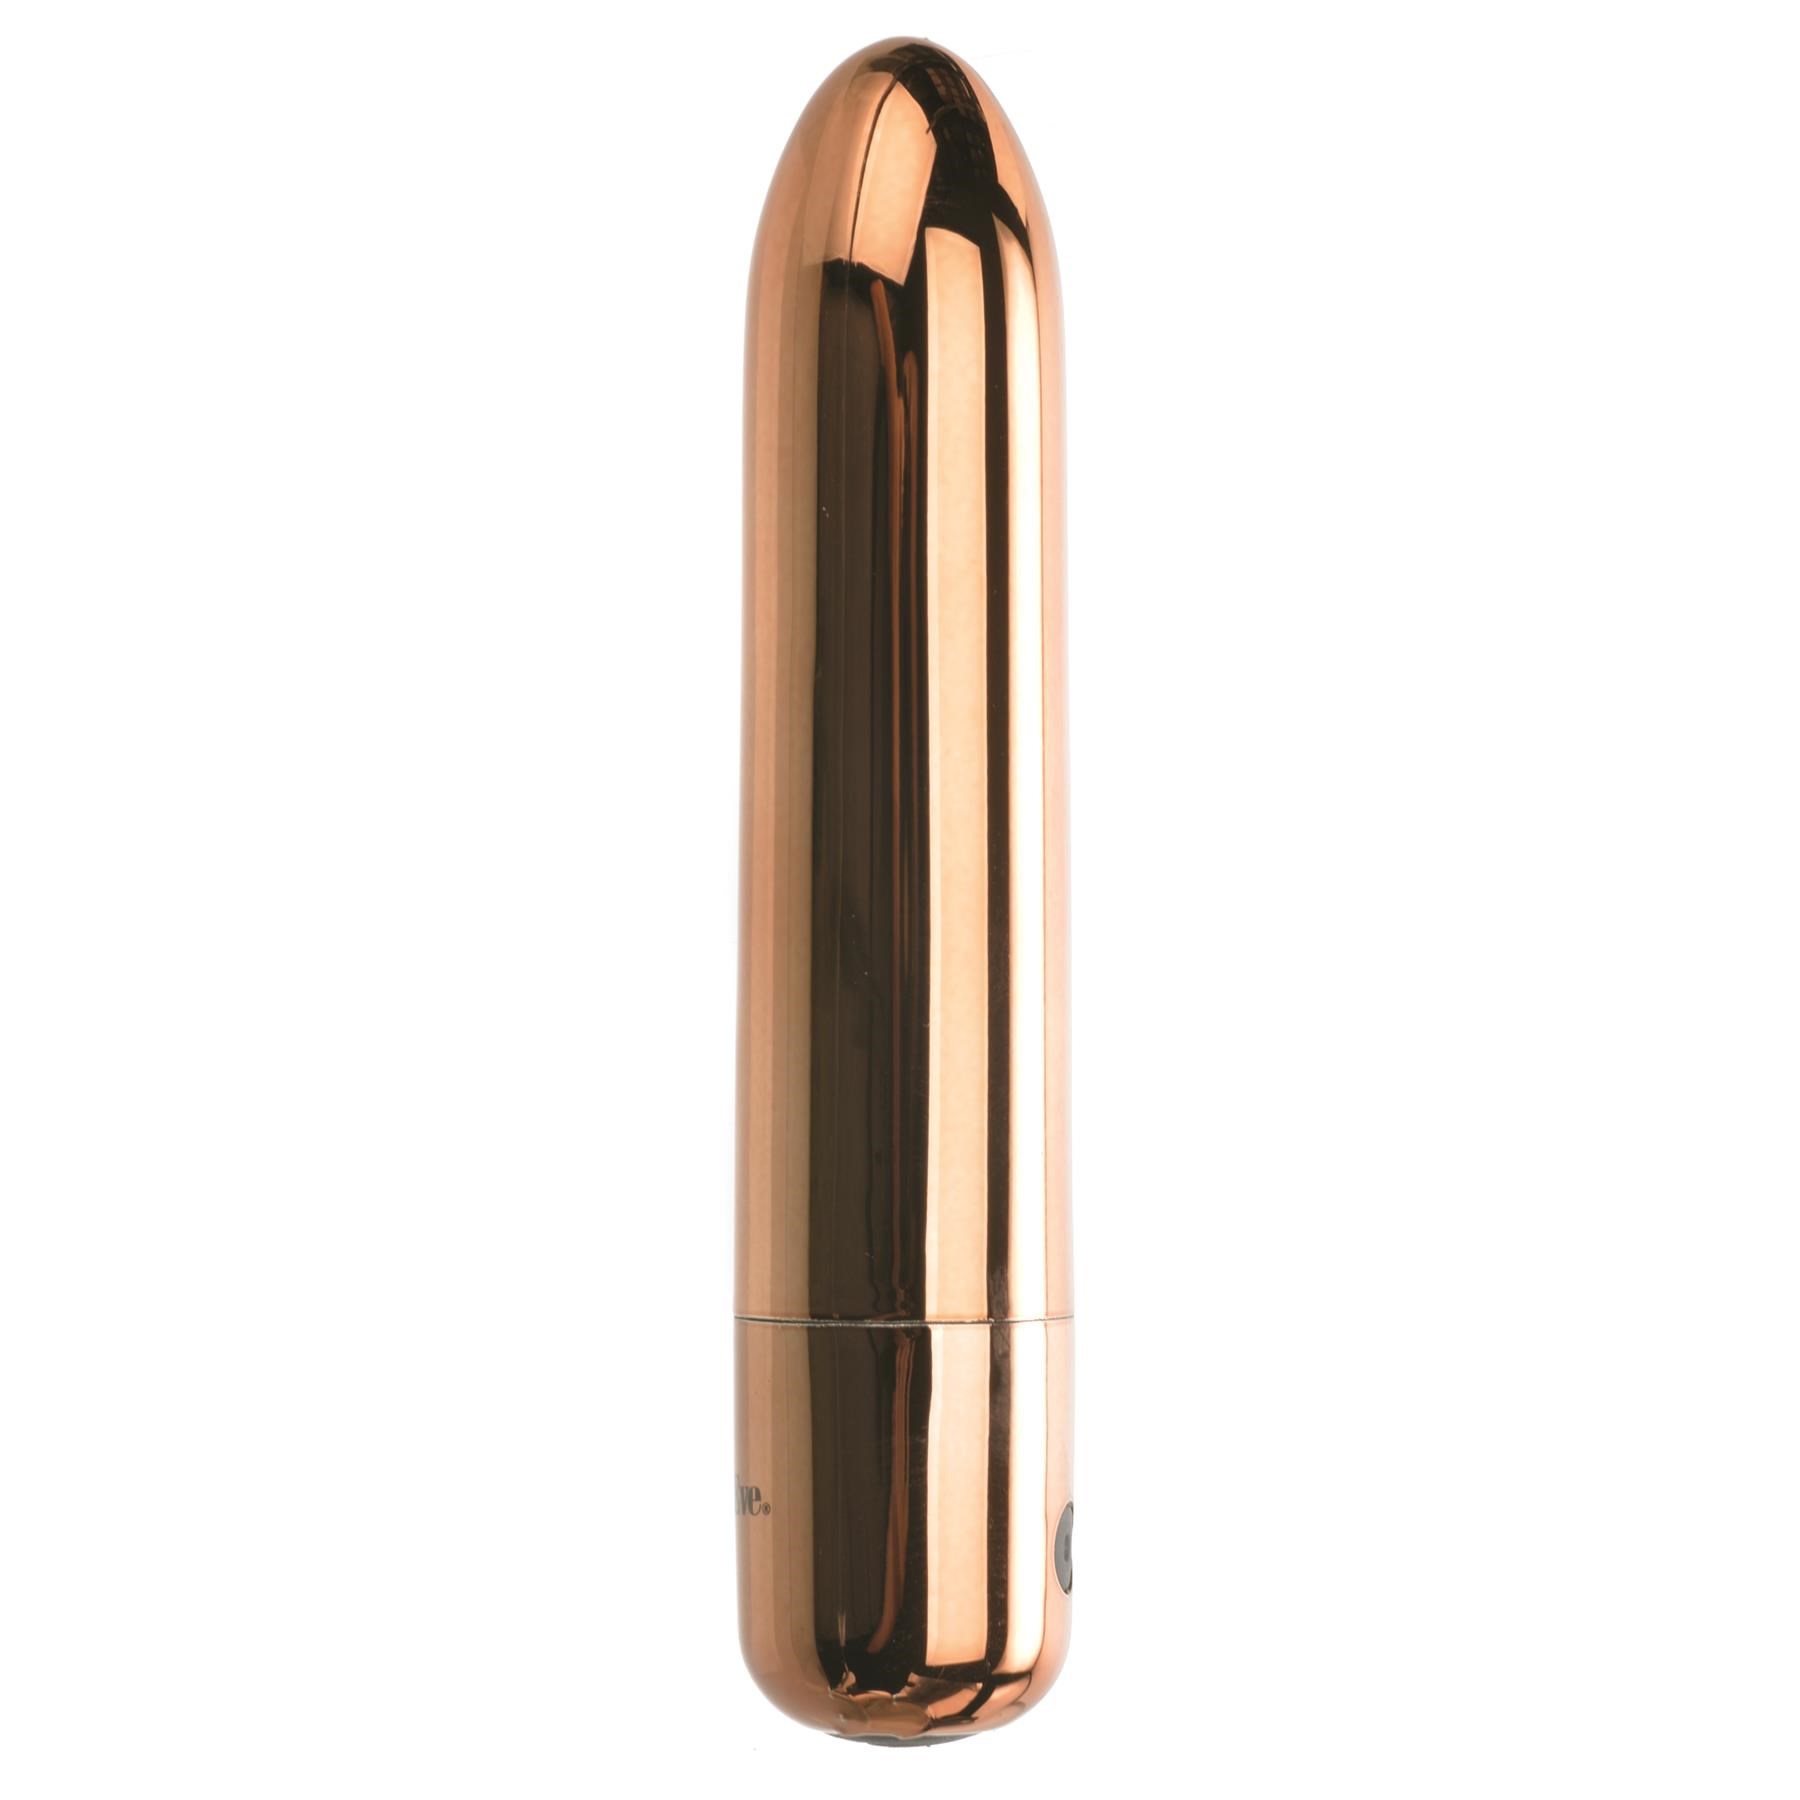 Eve's Copper Cutie Rechargeable Bullet Upright Product Shot